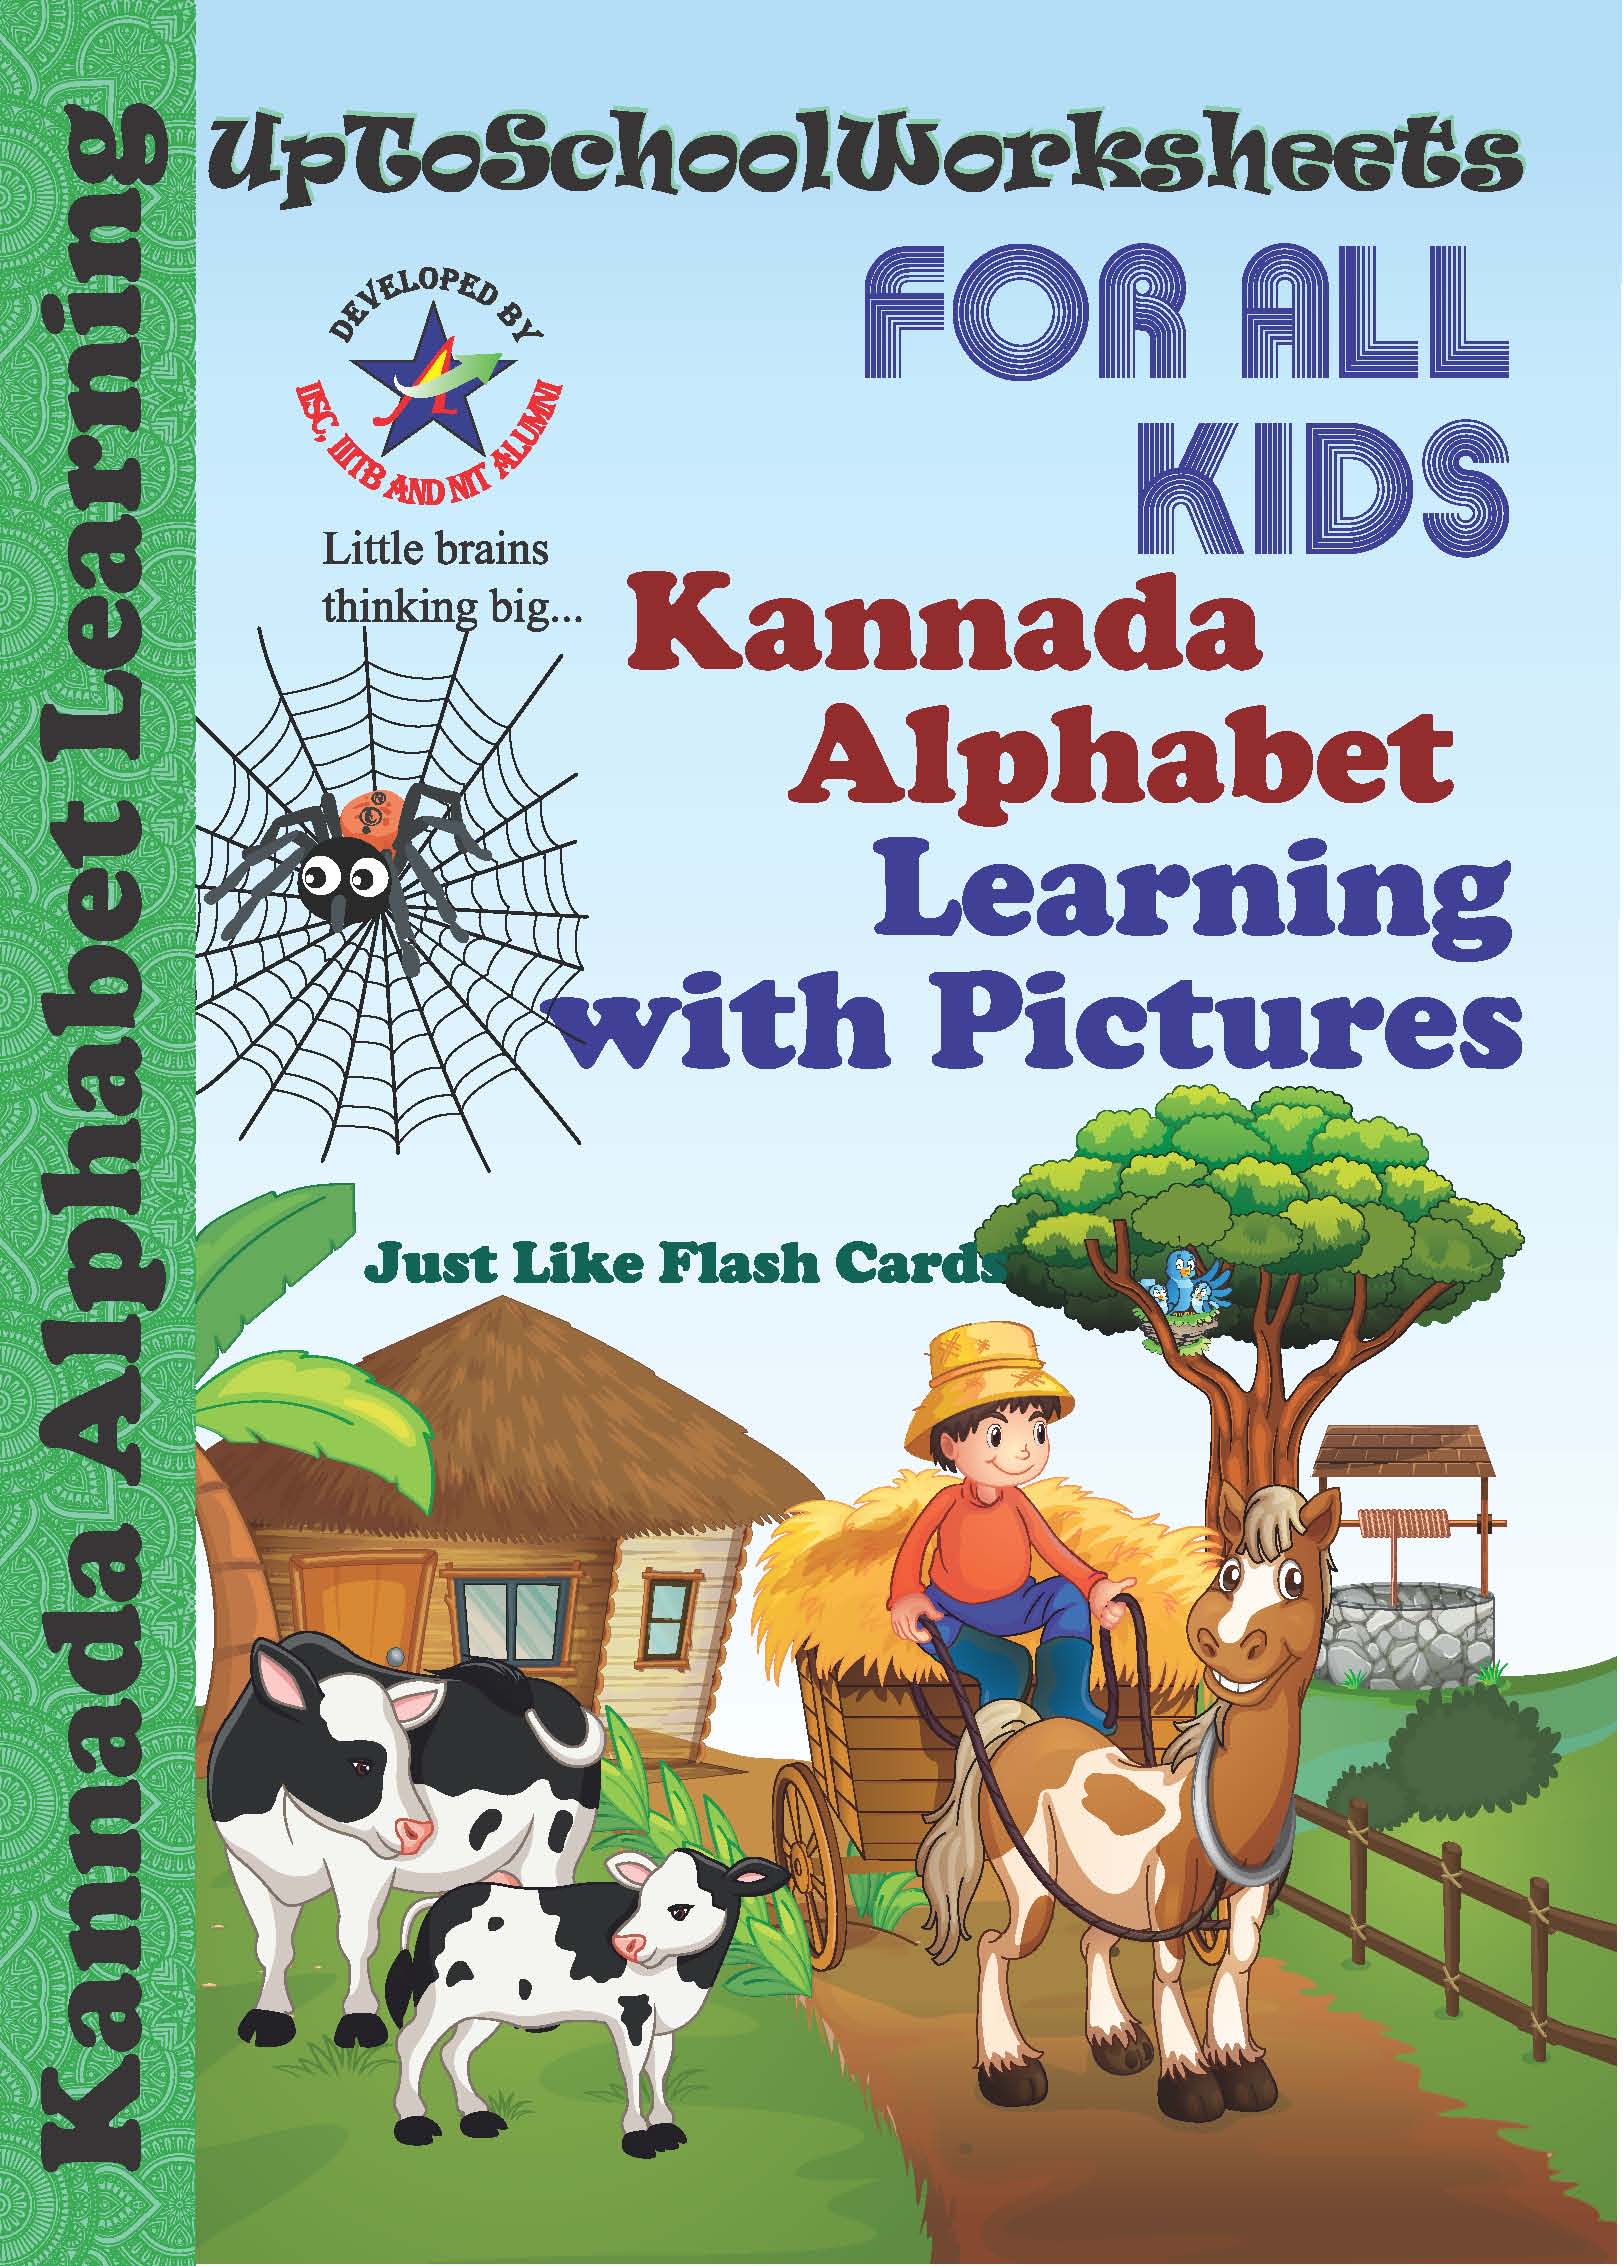 Kannada Alphabet Learning with Pictures